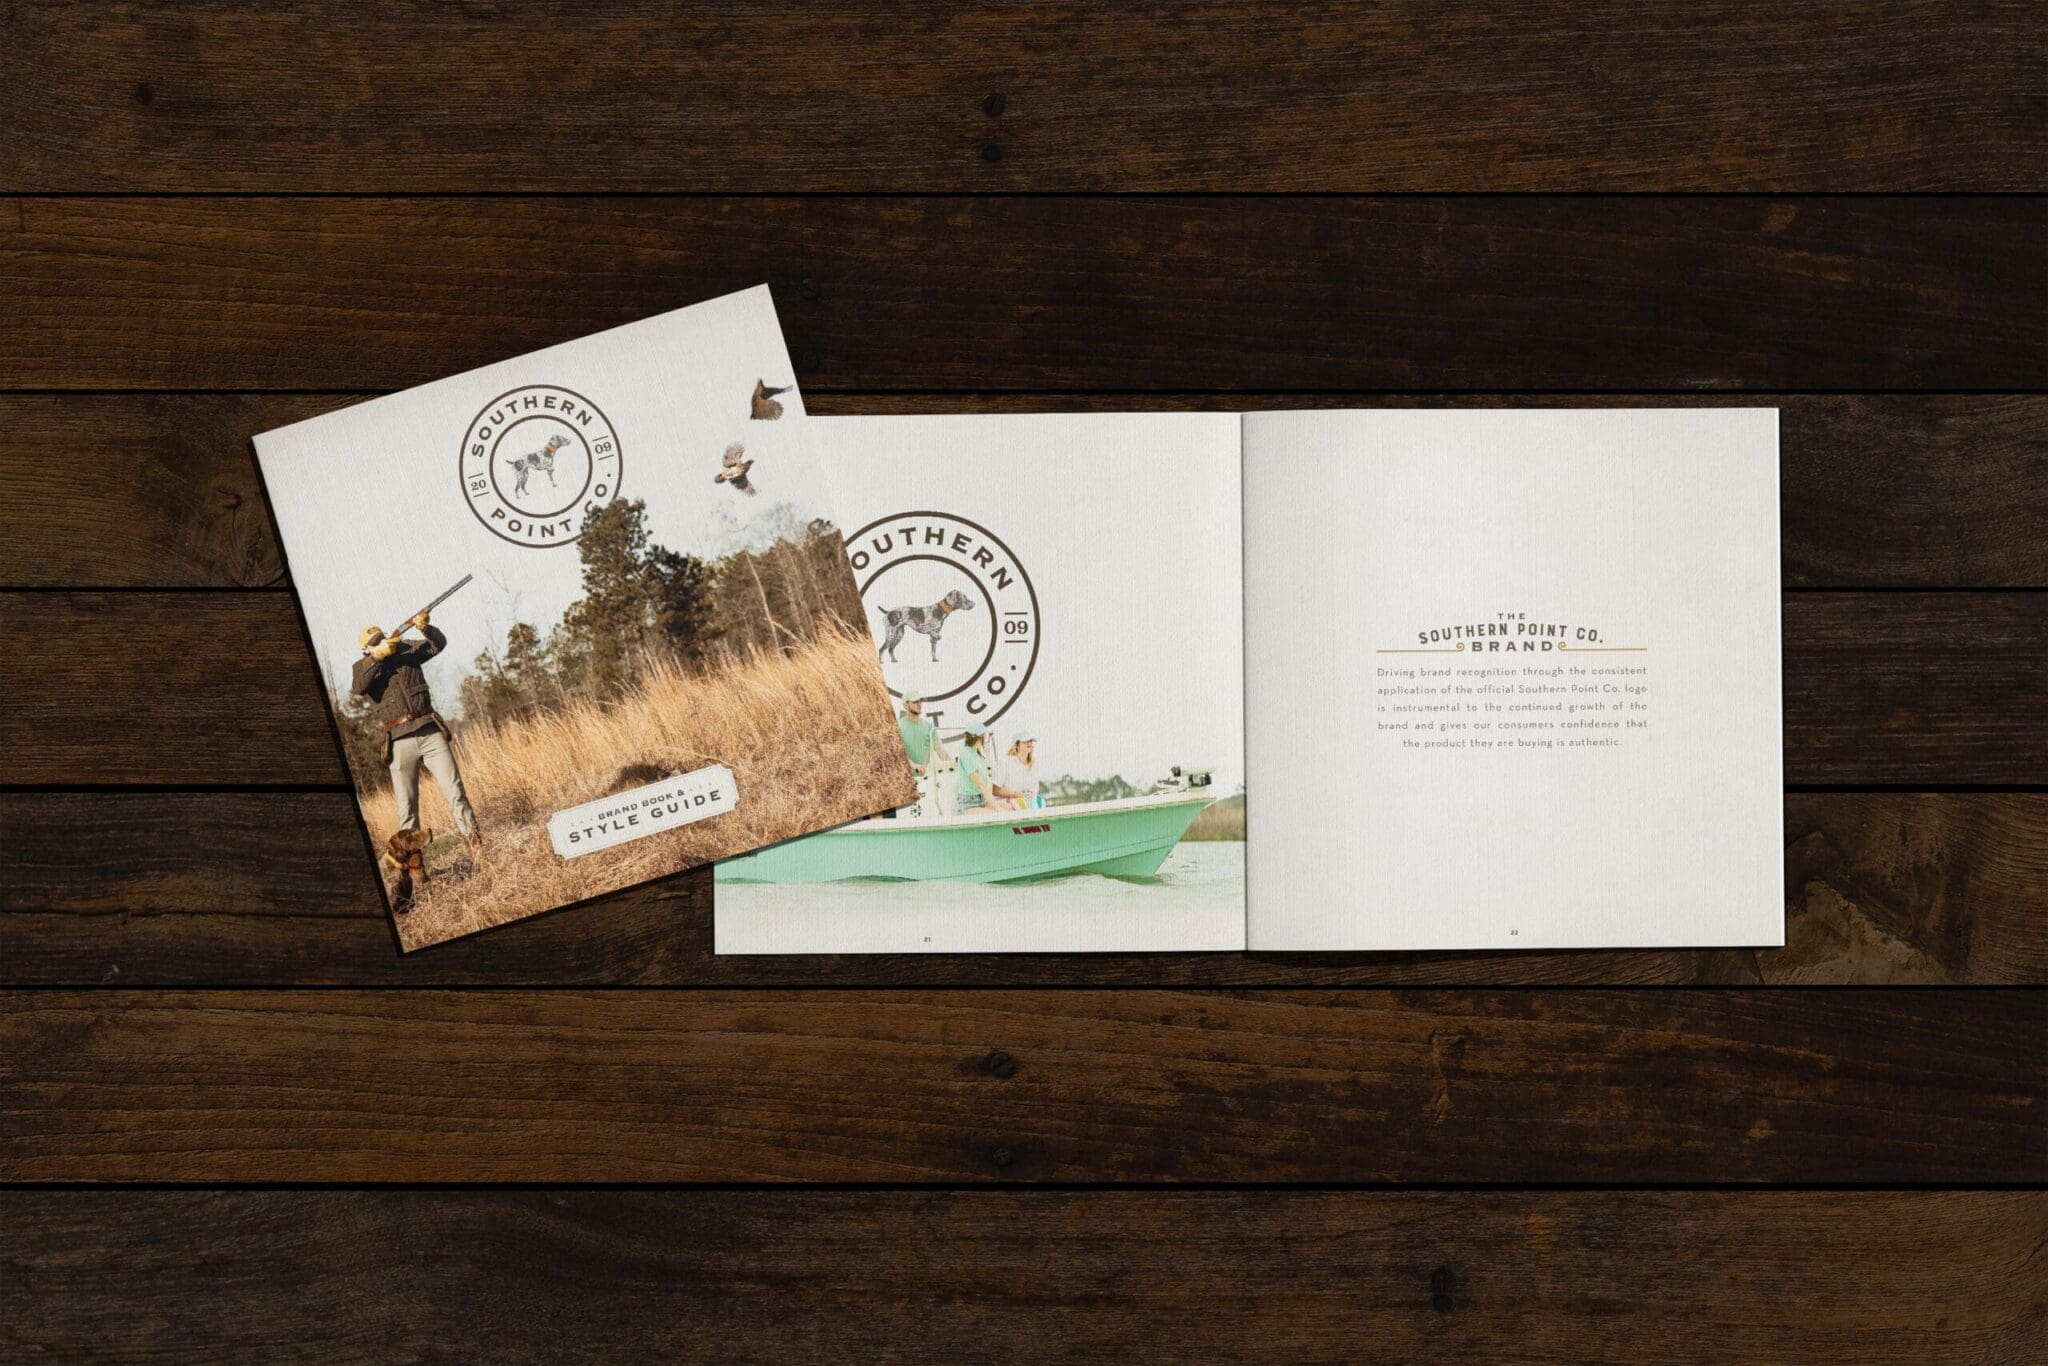 Southern Point Co brand book